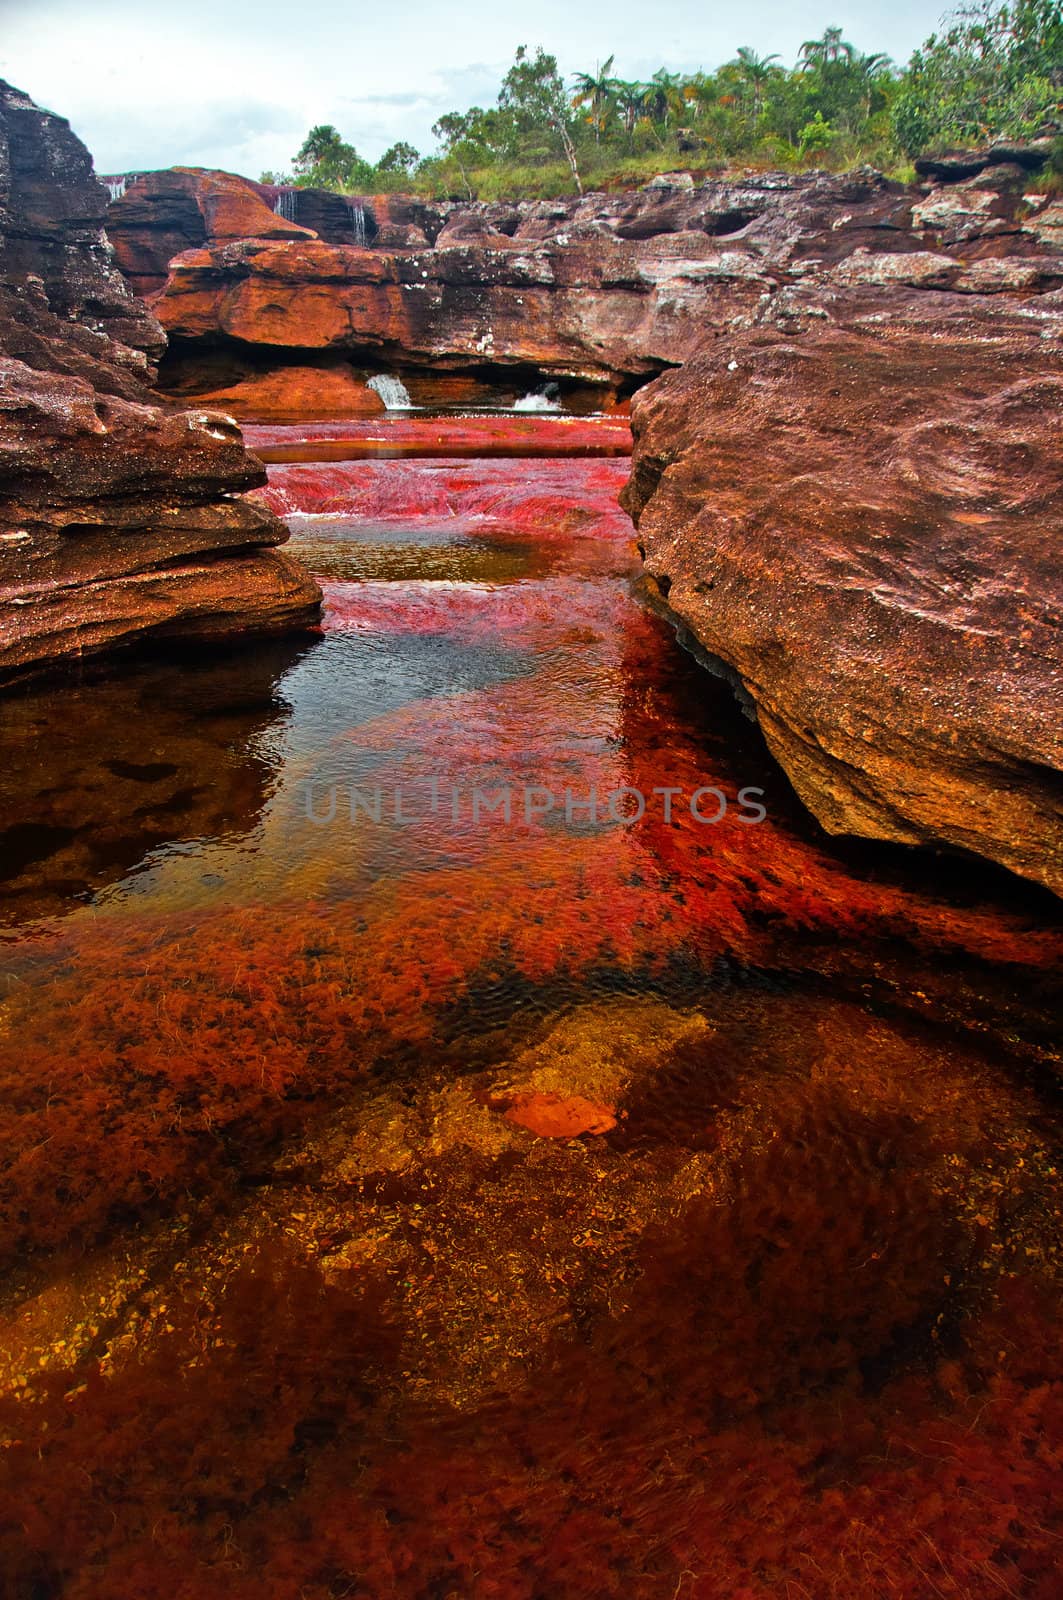 Cano Cristales, also known as the seven colored river, in Meta, Colombia.